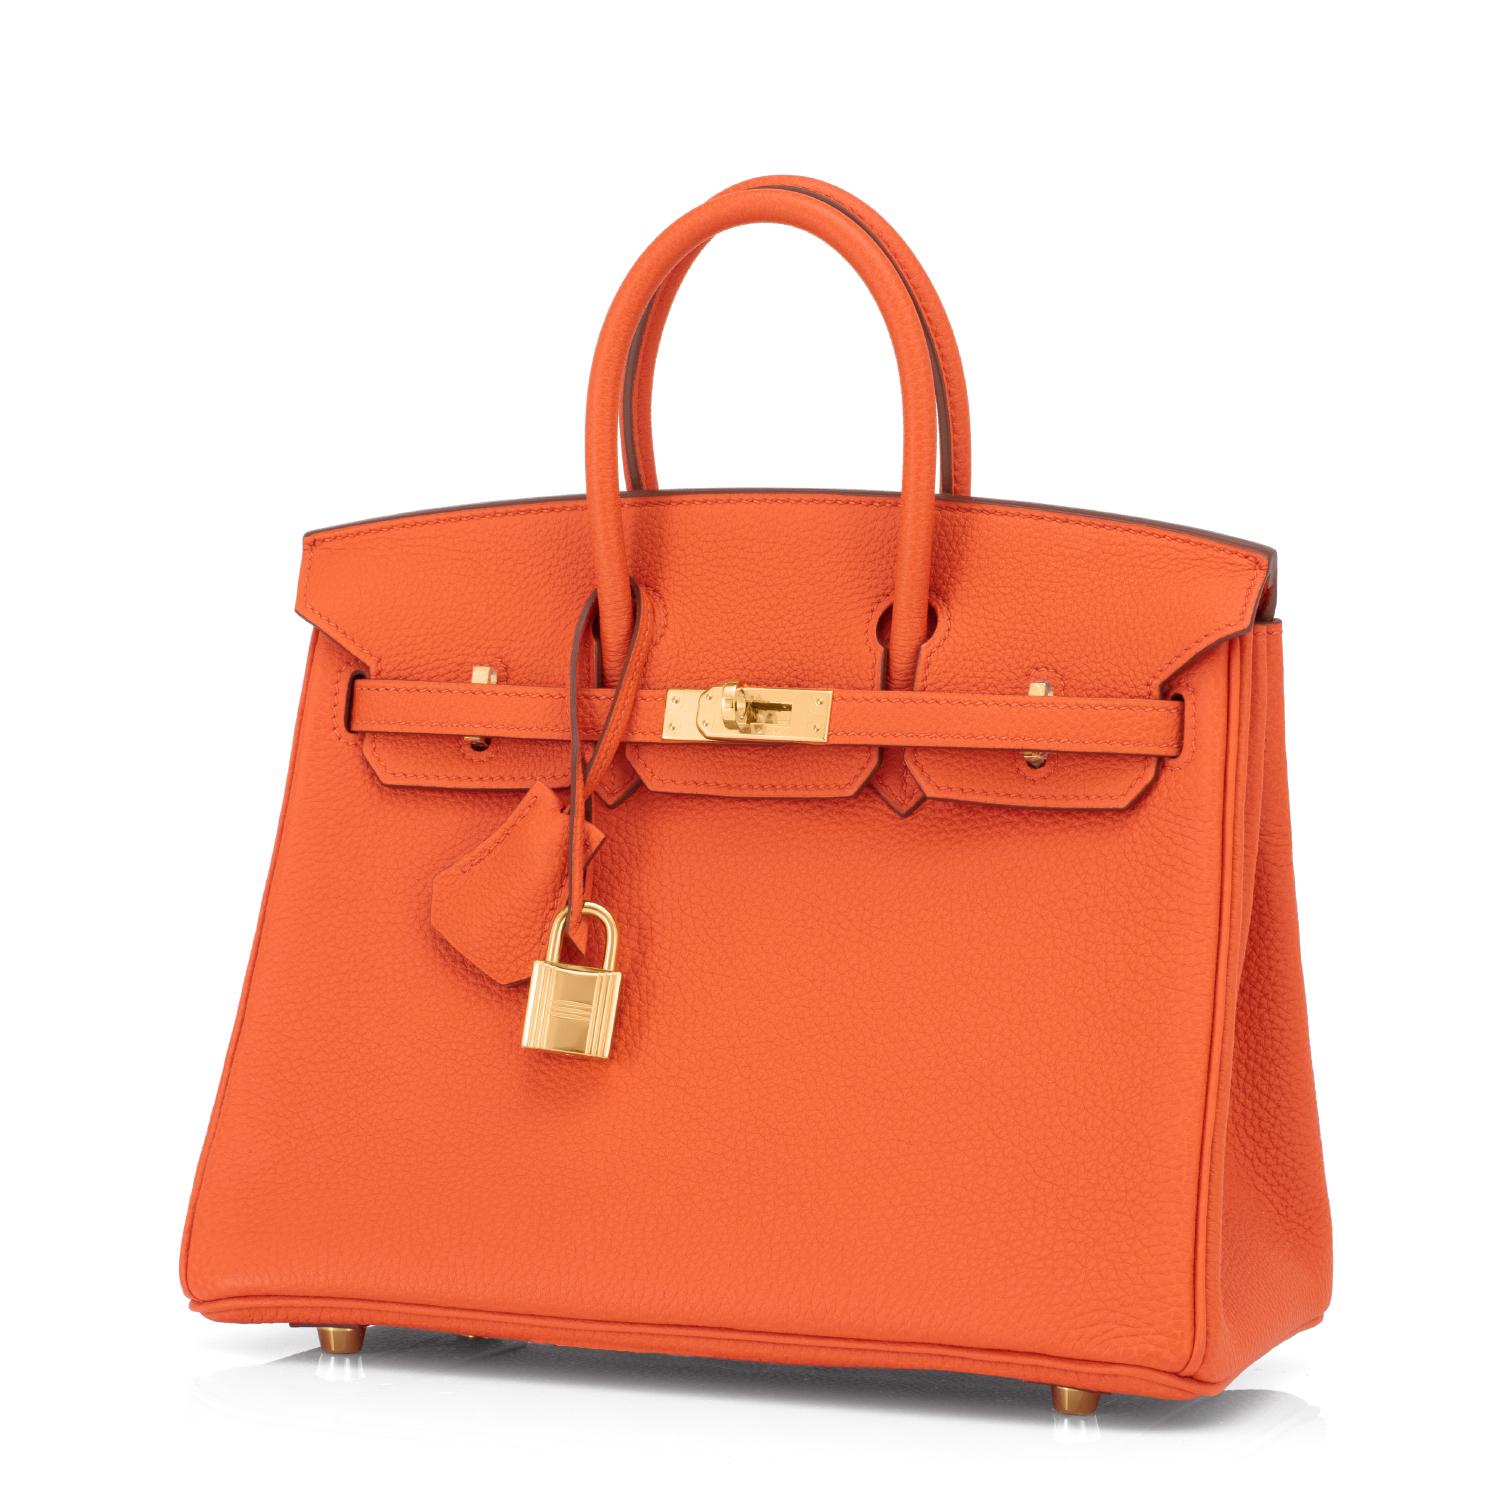 Hermes Birkin 25 Orange Feu Bag Gold Jewel Y Stamp, 2020
Just purchased from Hermes store; bag bears new interior 2020 Y Stamp.
Brand New in Box. Store fresh. Pristine Condition (with plastic on hardware)
Perfect gift! Comes with keys, lock,